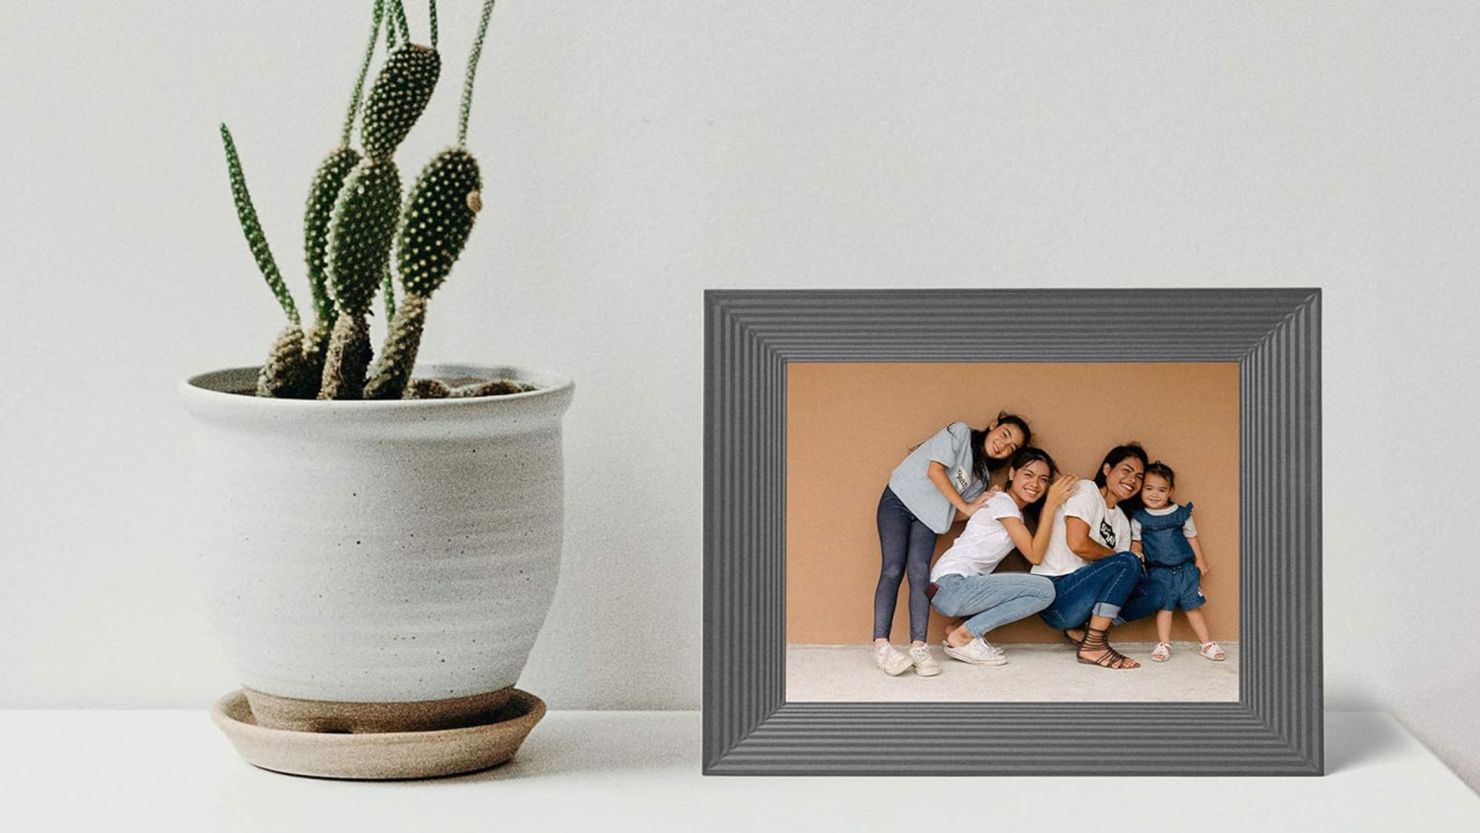 30 Unique Gifts From Black-Owned Businesses - The Mom Edit